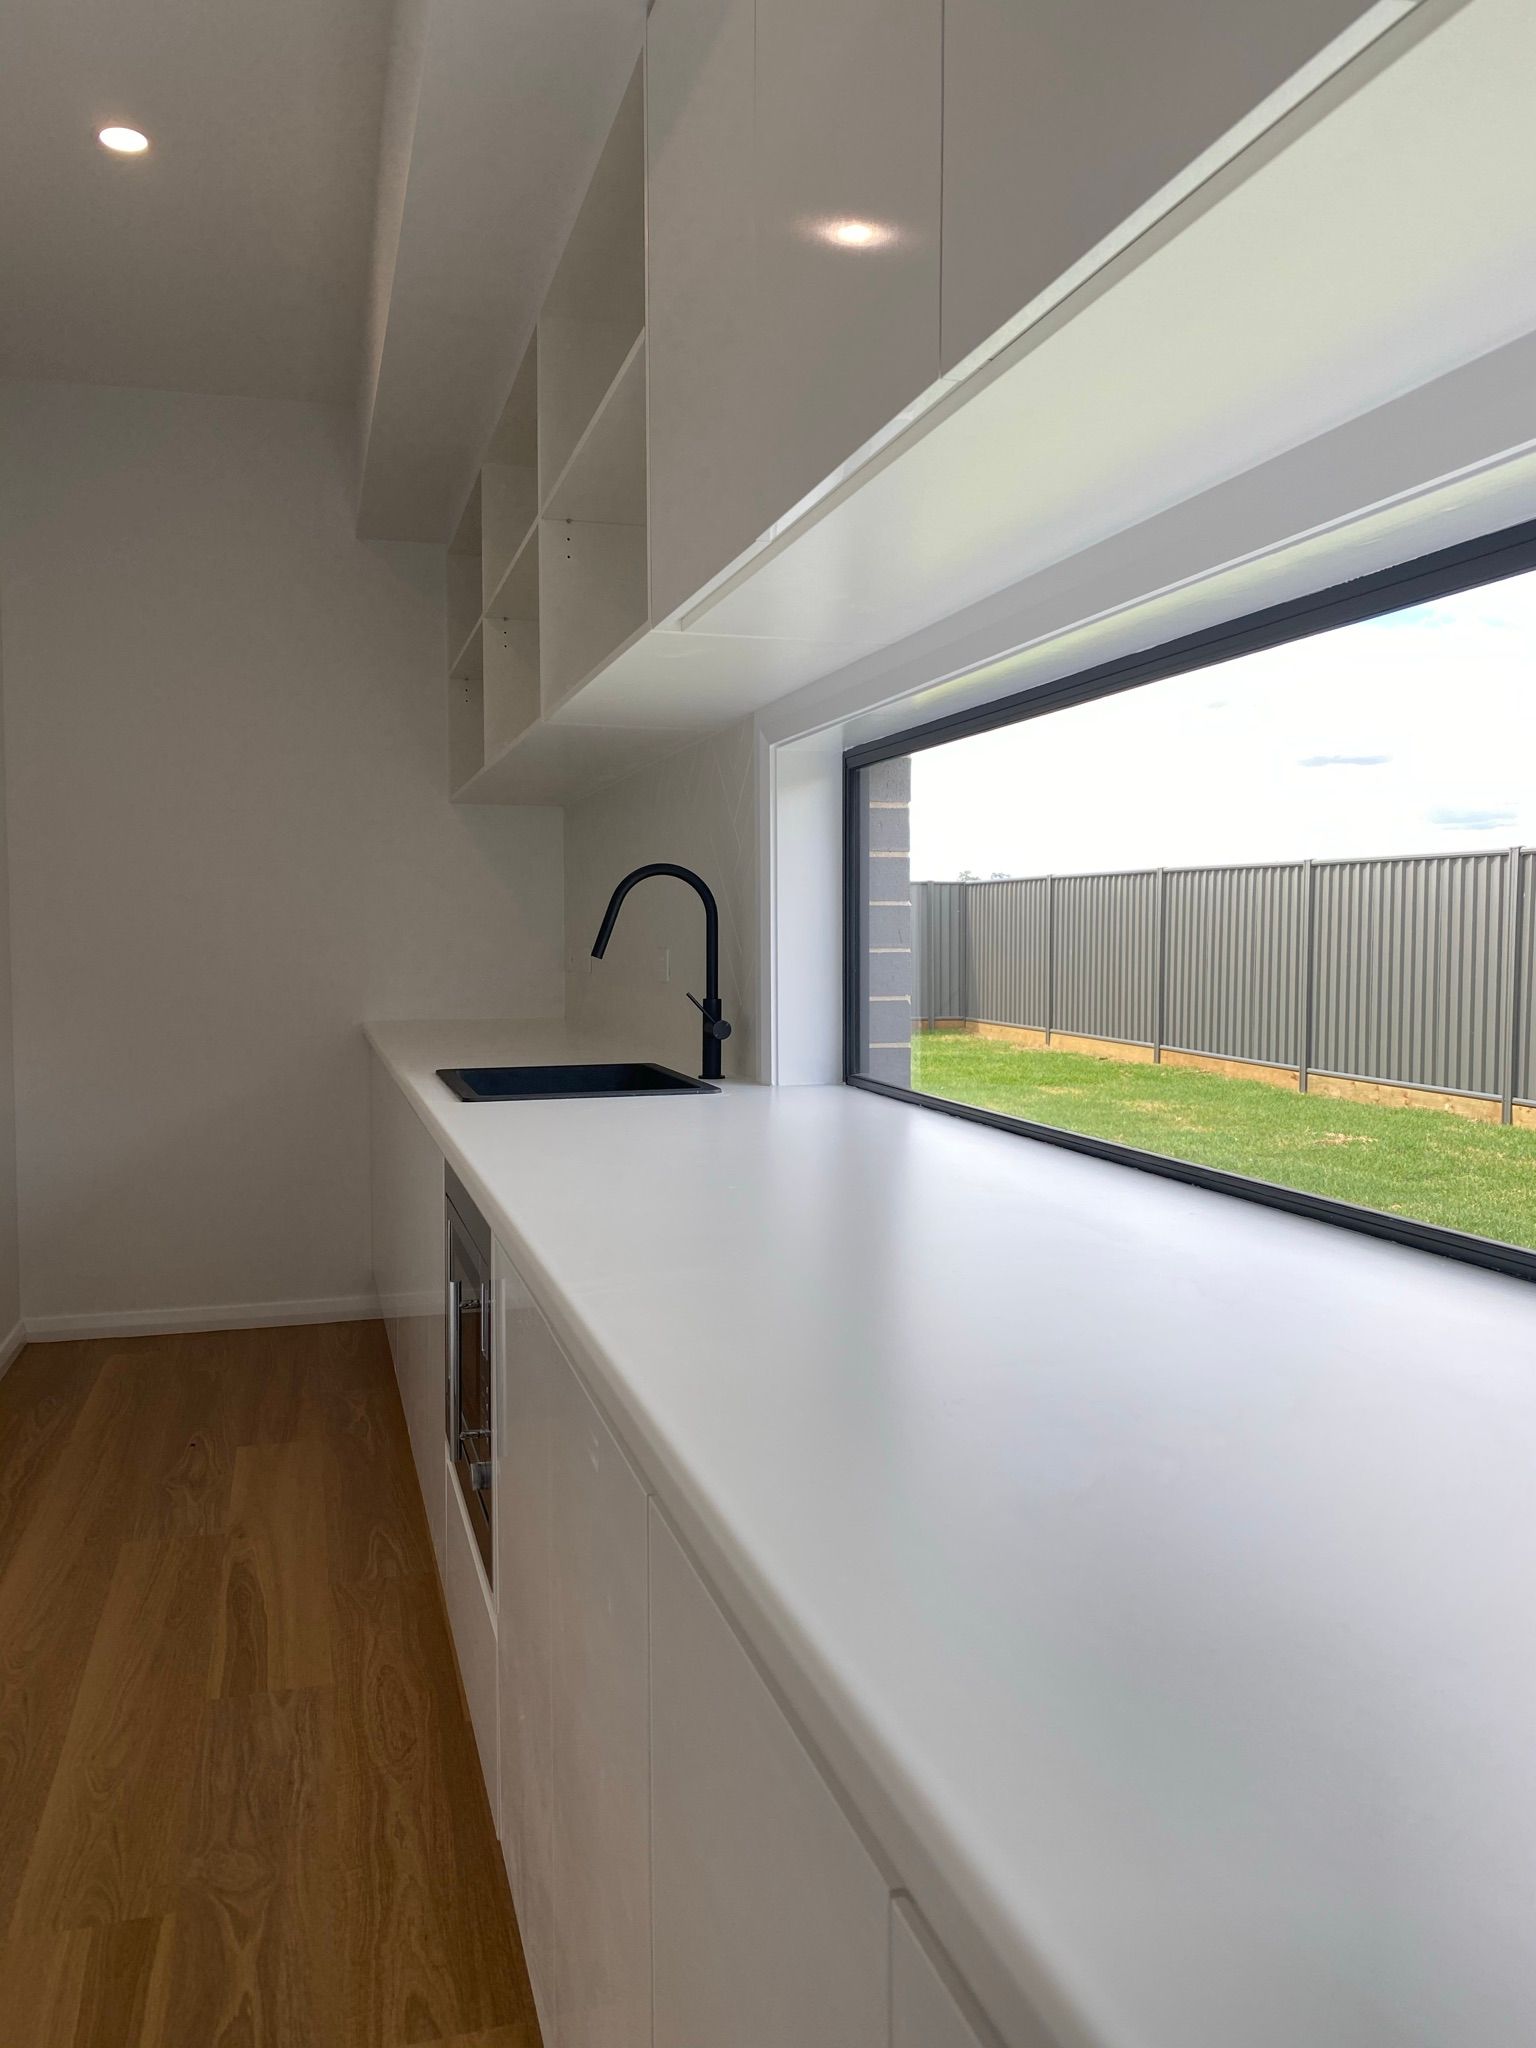 Side View of Countertop With Black Sink — Kitchen Renovations in Dubbo, QLD